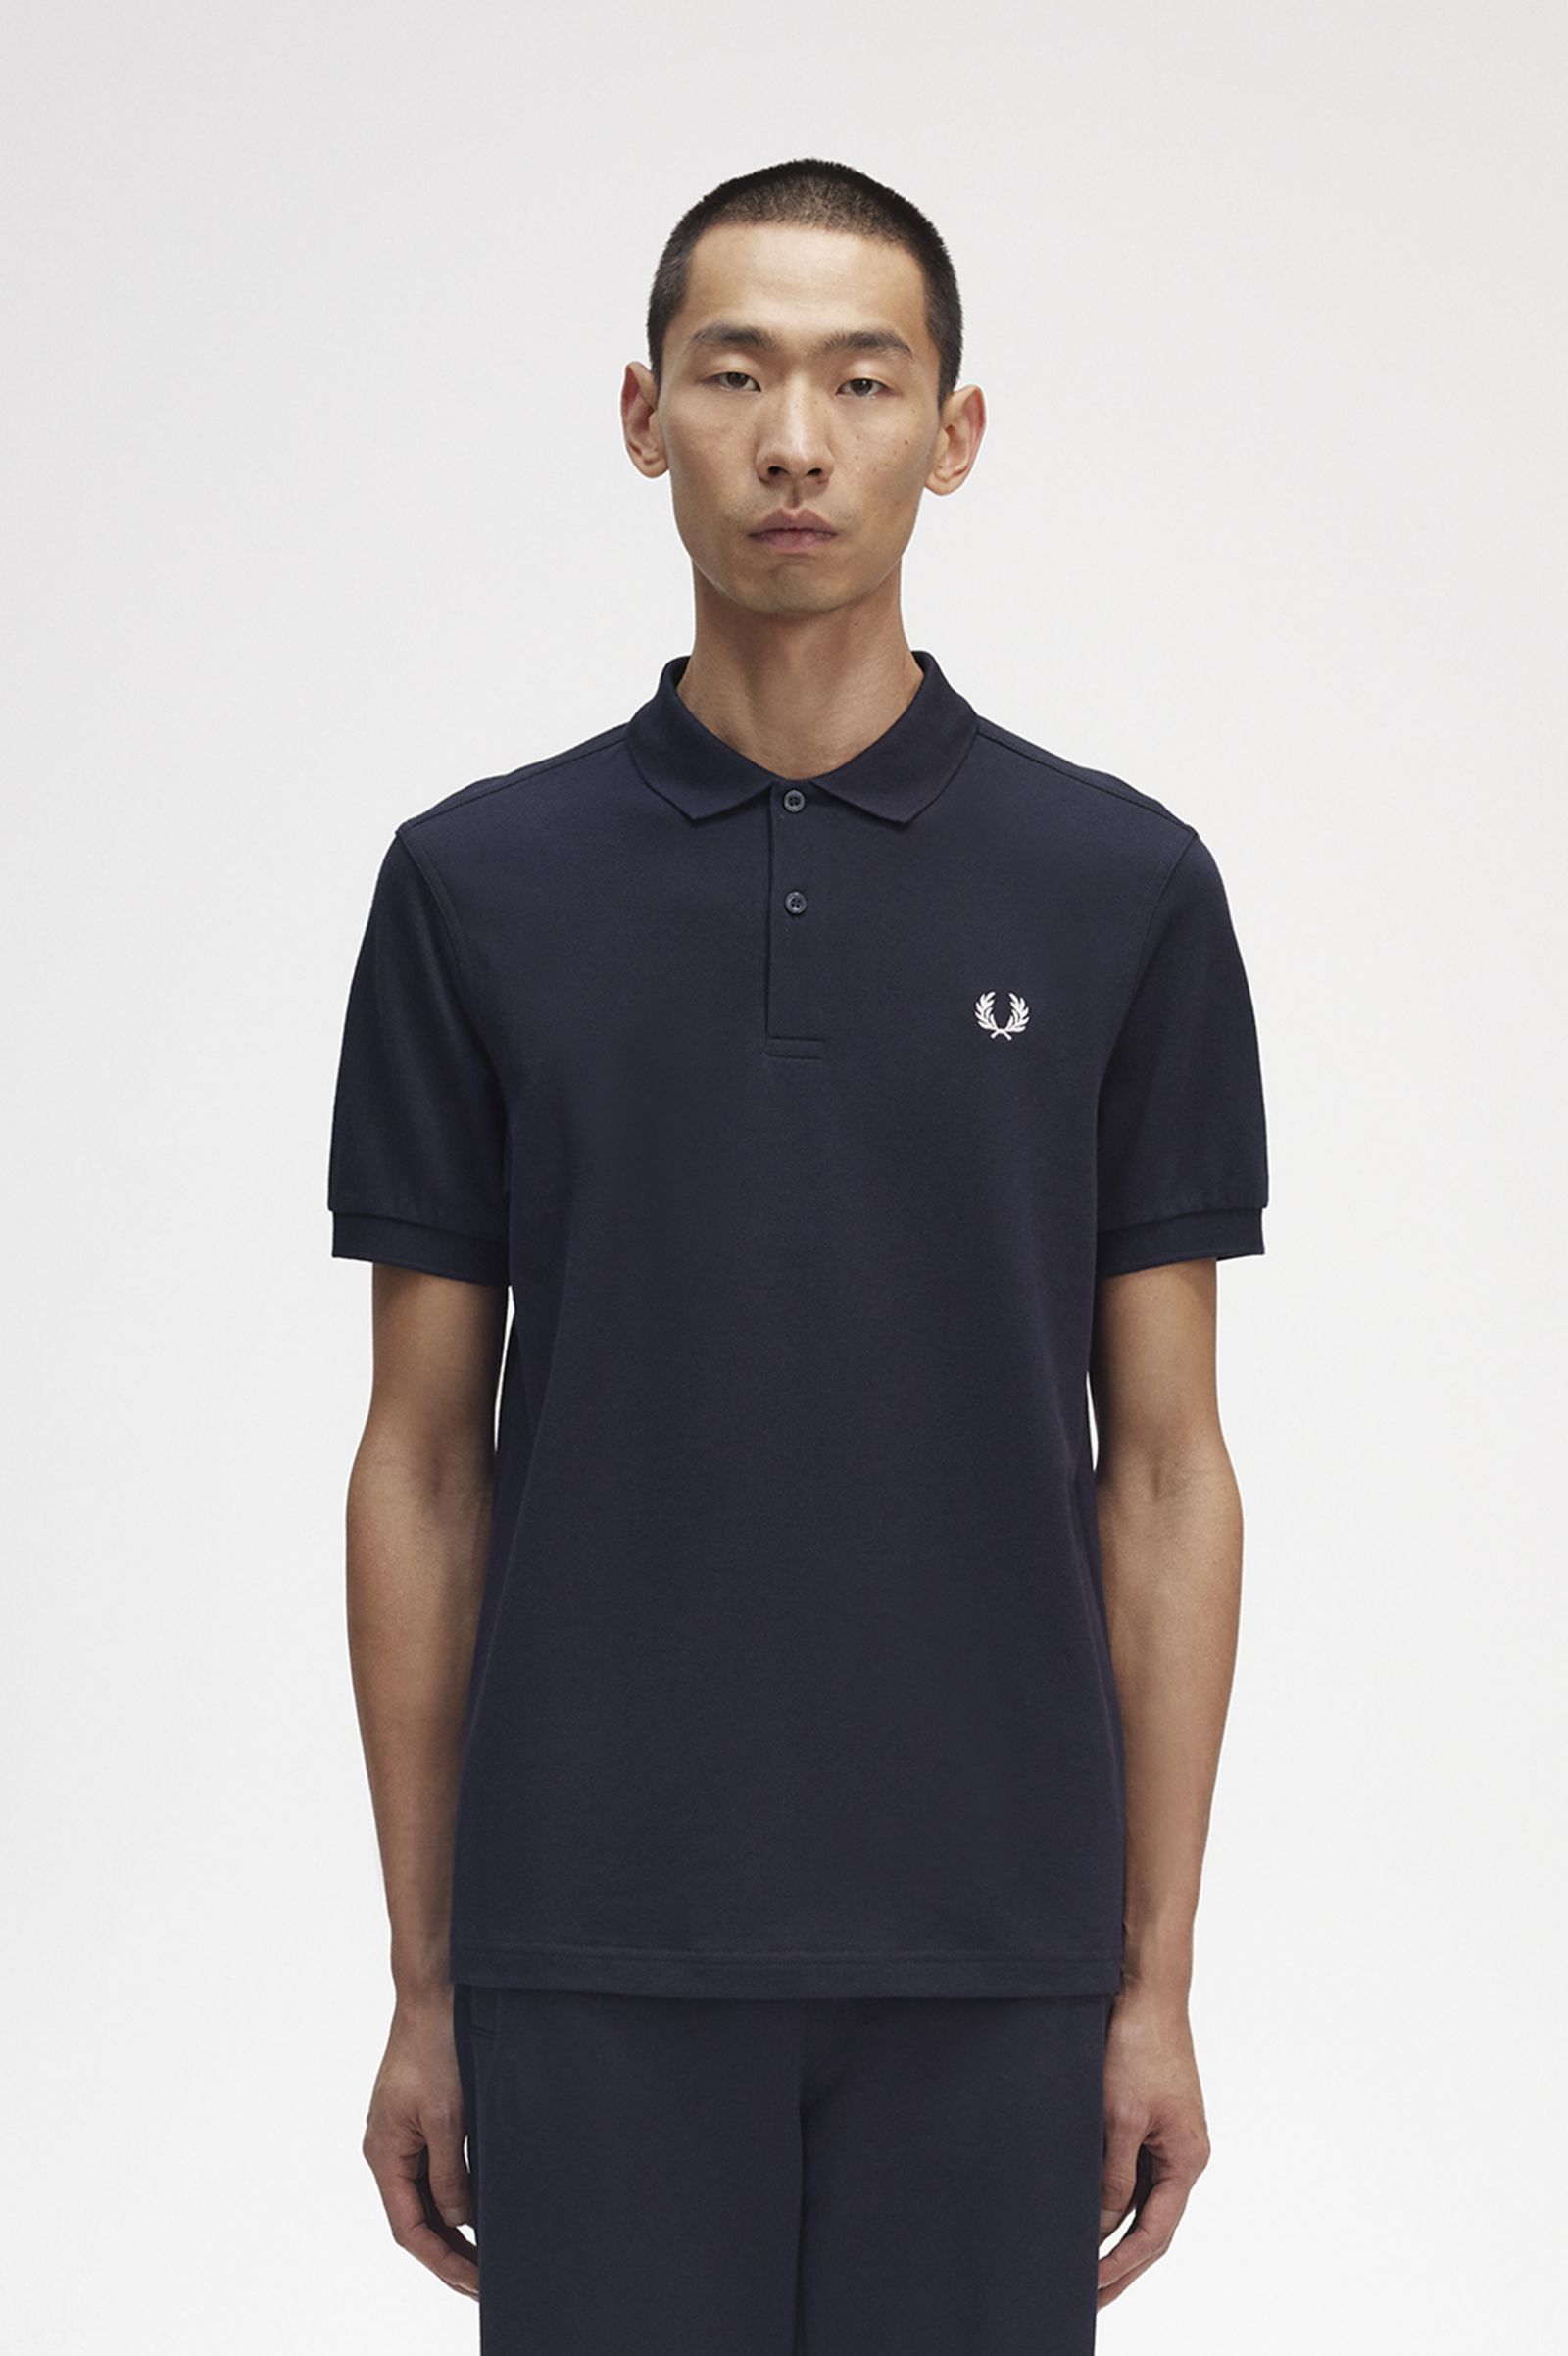 Op grote schaal Spaans Teken een foto M6000 - Navy / White | The Fred Perry Shirt | Men's Short & Long Sleeve Polo  Shirts | Fred Perry US